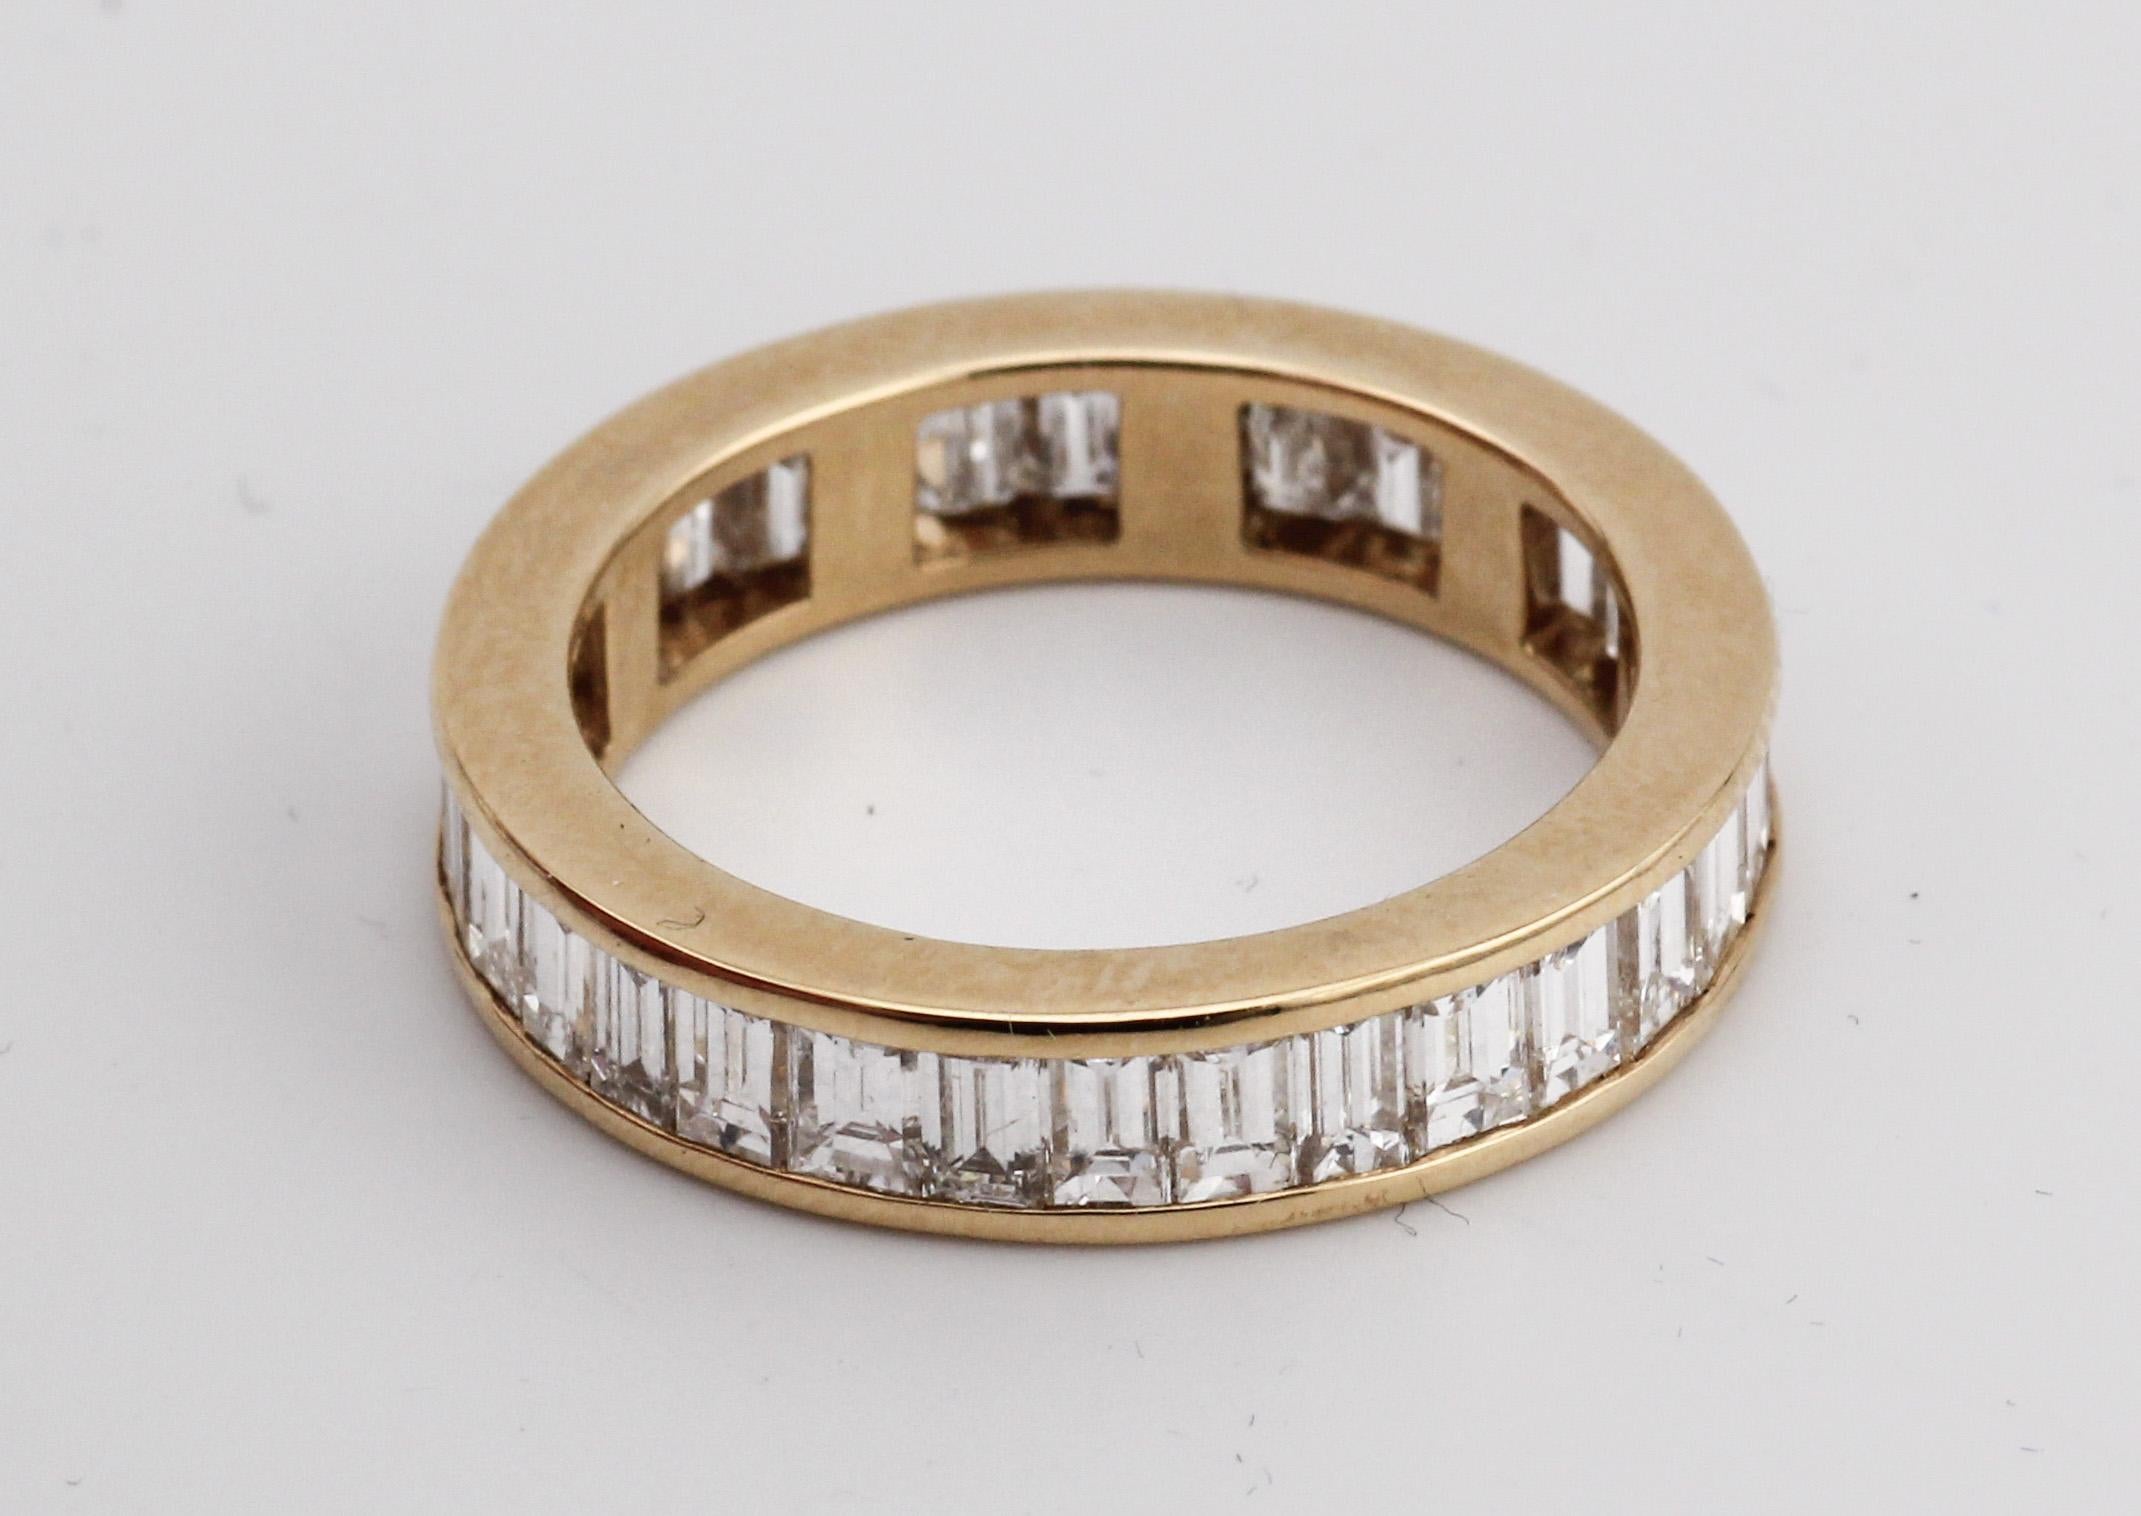 Bulgari Baguette Diamond 18K Yellow Gold Eternity Band Size 6 In Good Condition For Sale In Bellmore, NY